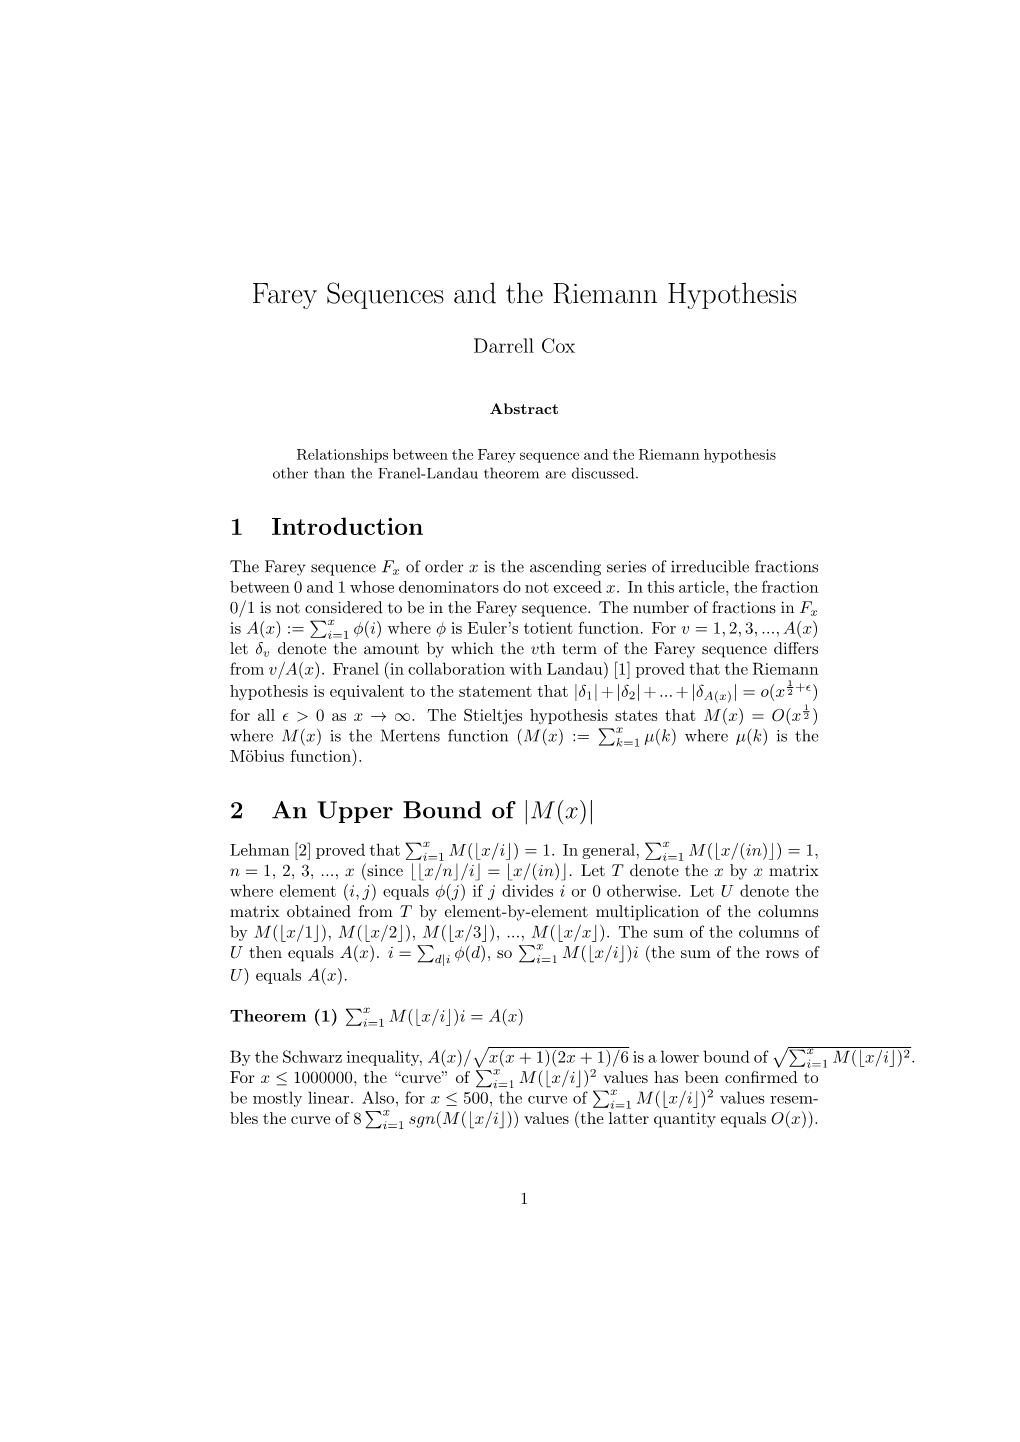 Farey Sequences and the Riemann Hypothesis